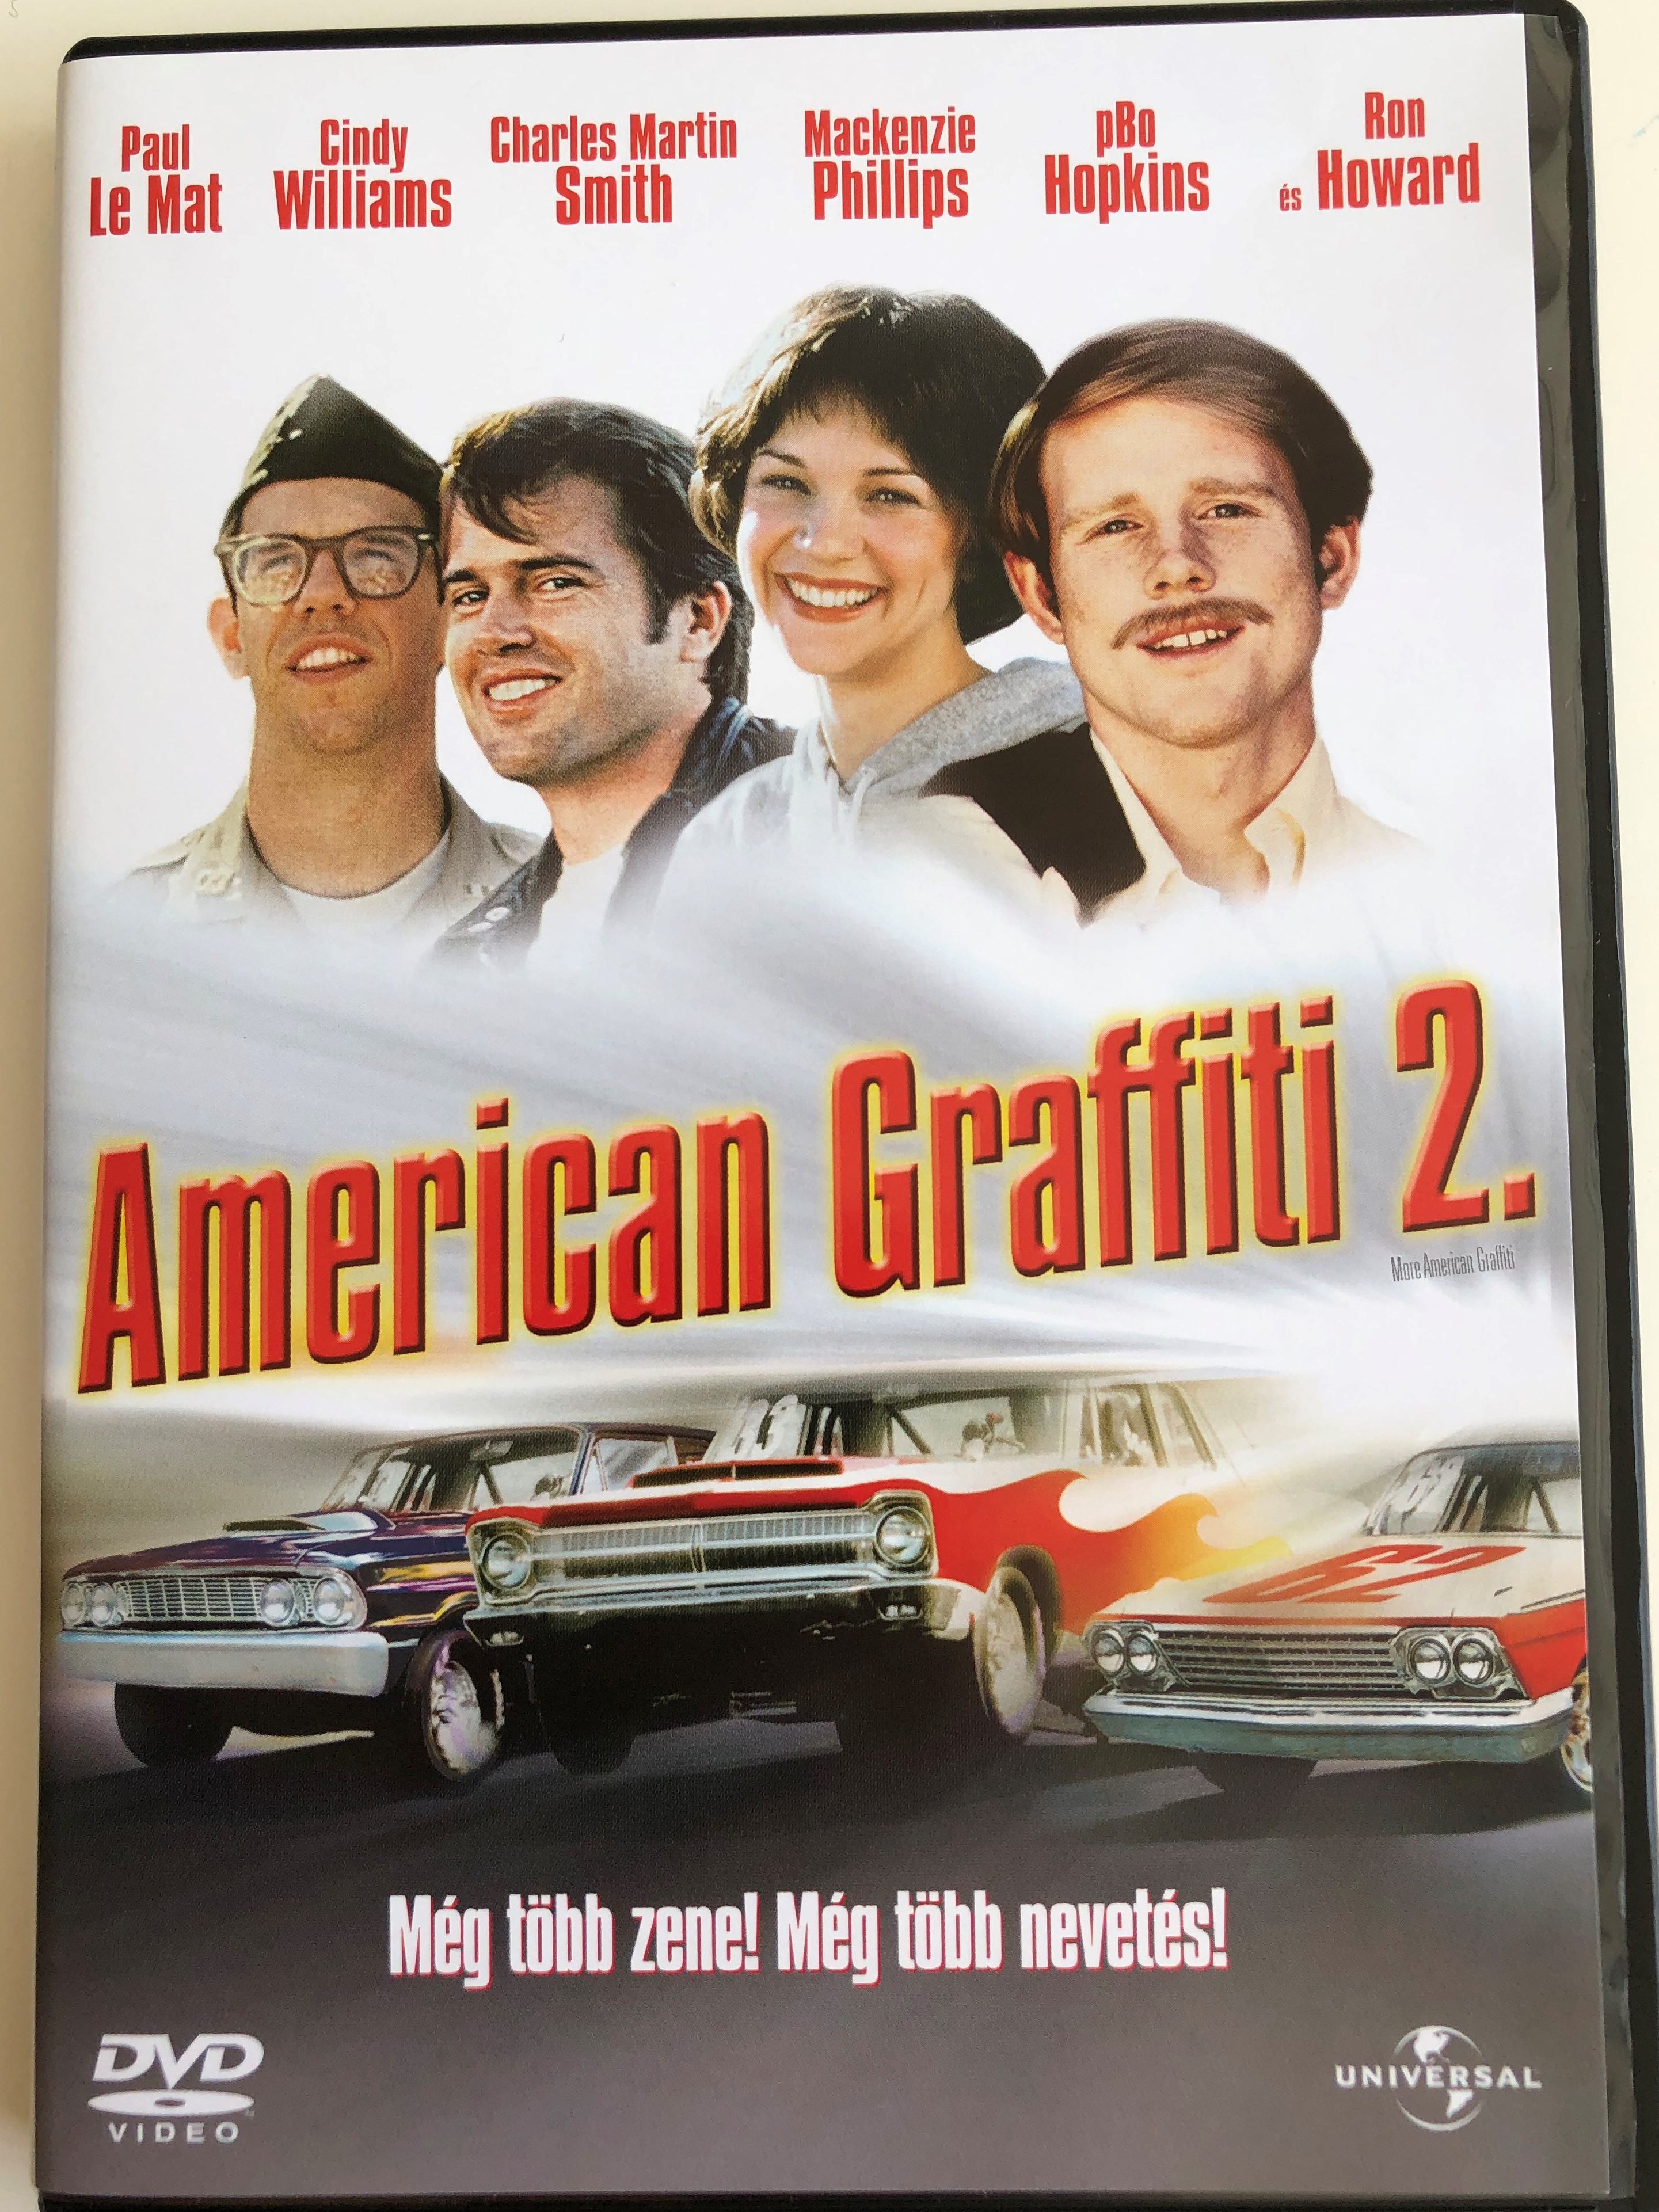 More American Graffiti DVD 1979 American Graffiti 2. / Directed by Bill L.  Norton / Starring: Candy Clark, Bo Hopkins, Ron Howard, Paul Le Mat,  Mackenzie Phillips / Based on Characters by